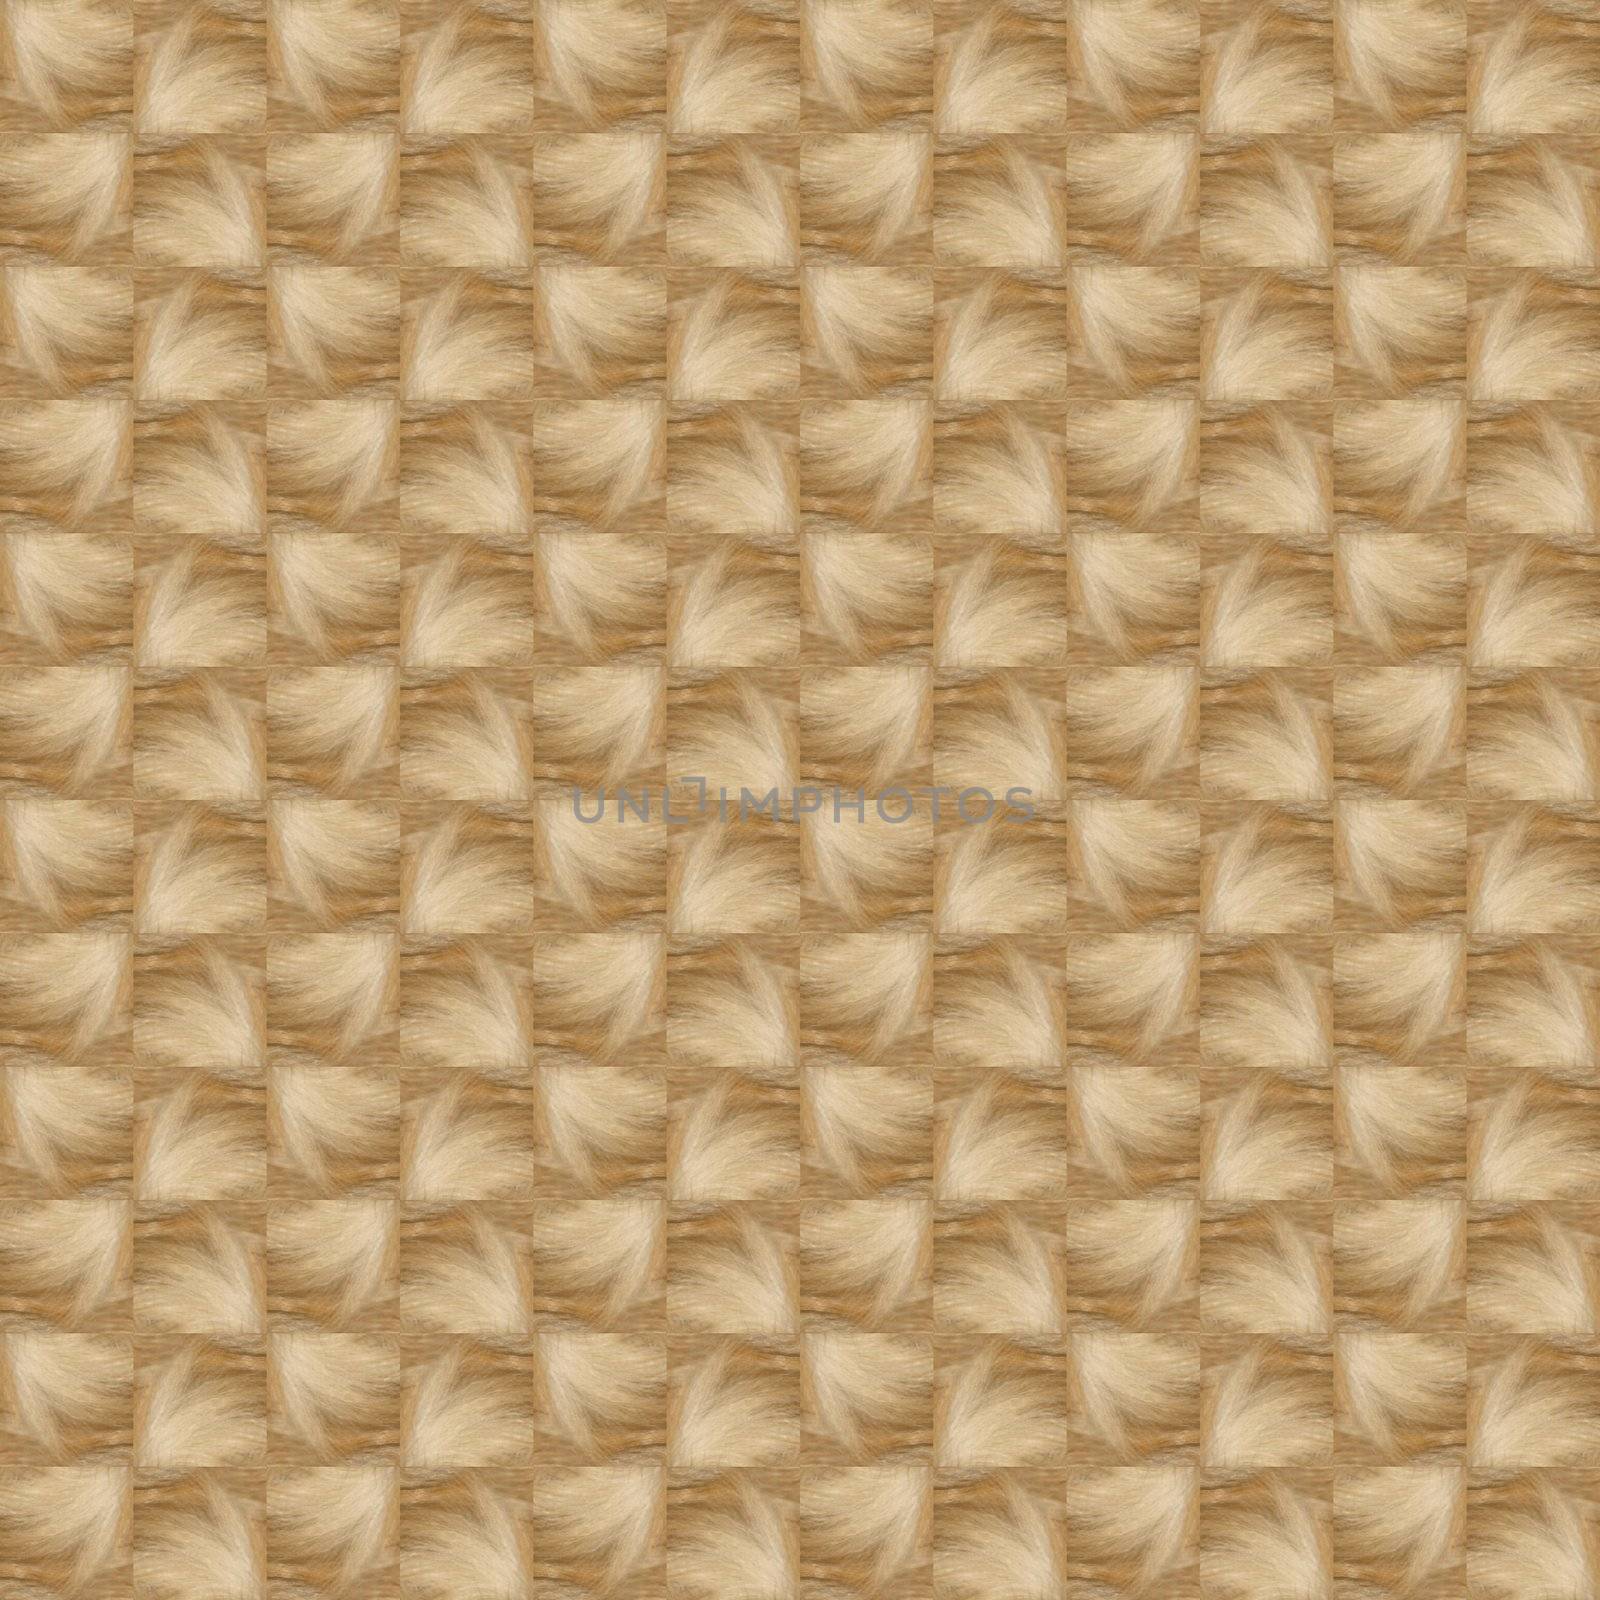 Beige seamless tileable background. Fur pattern retro texture with an old-fashioned twist